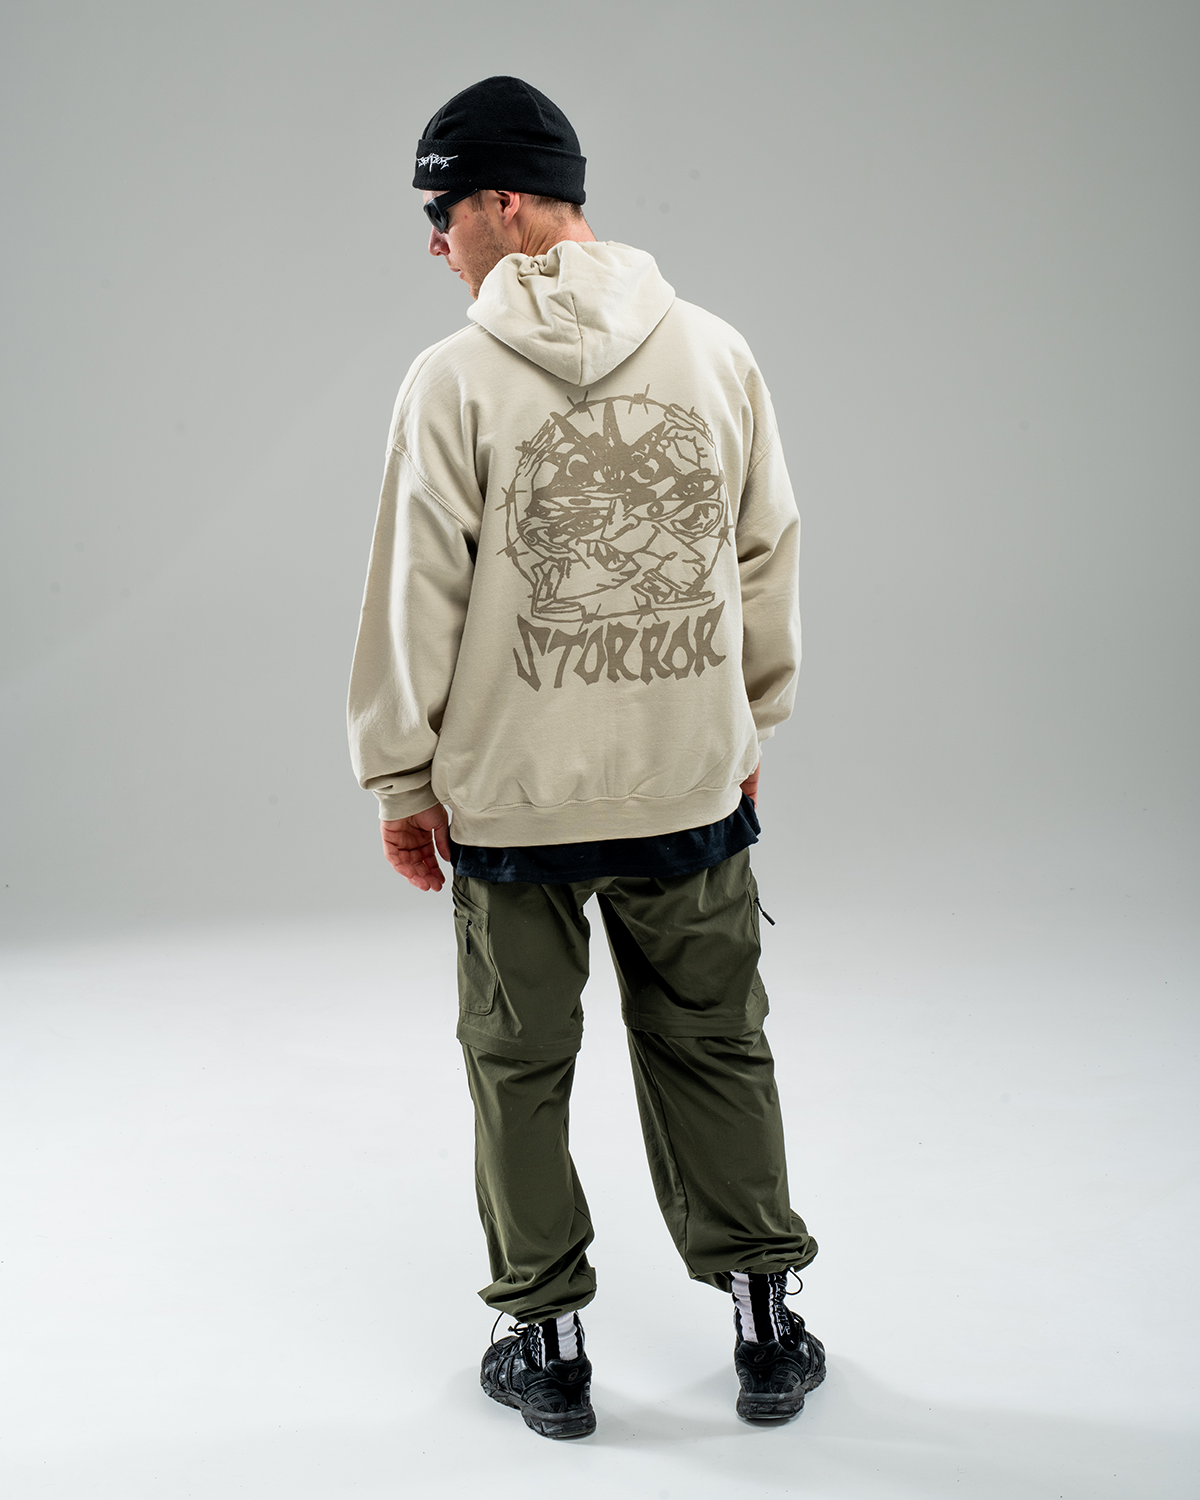 BARBED HOODIE | STORROR | parkour clothing & technical sportswear